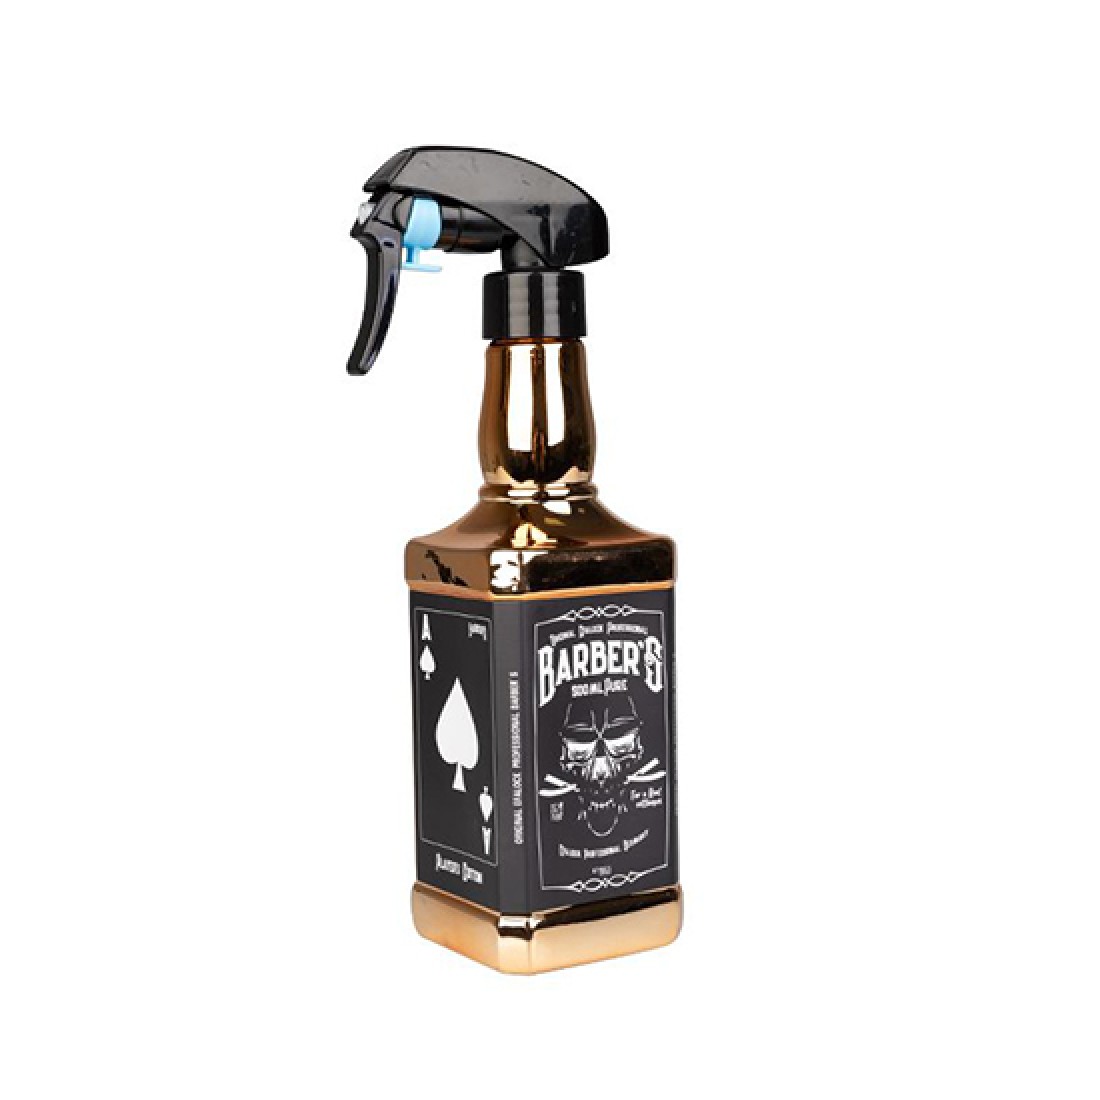 Barber hair Sprayer Whiskey Gold 500ml - 0133236 ACCESSORIES - WORK PRODUCTS - HAIR COLOUR ACCESORIES 